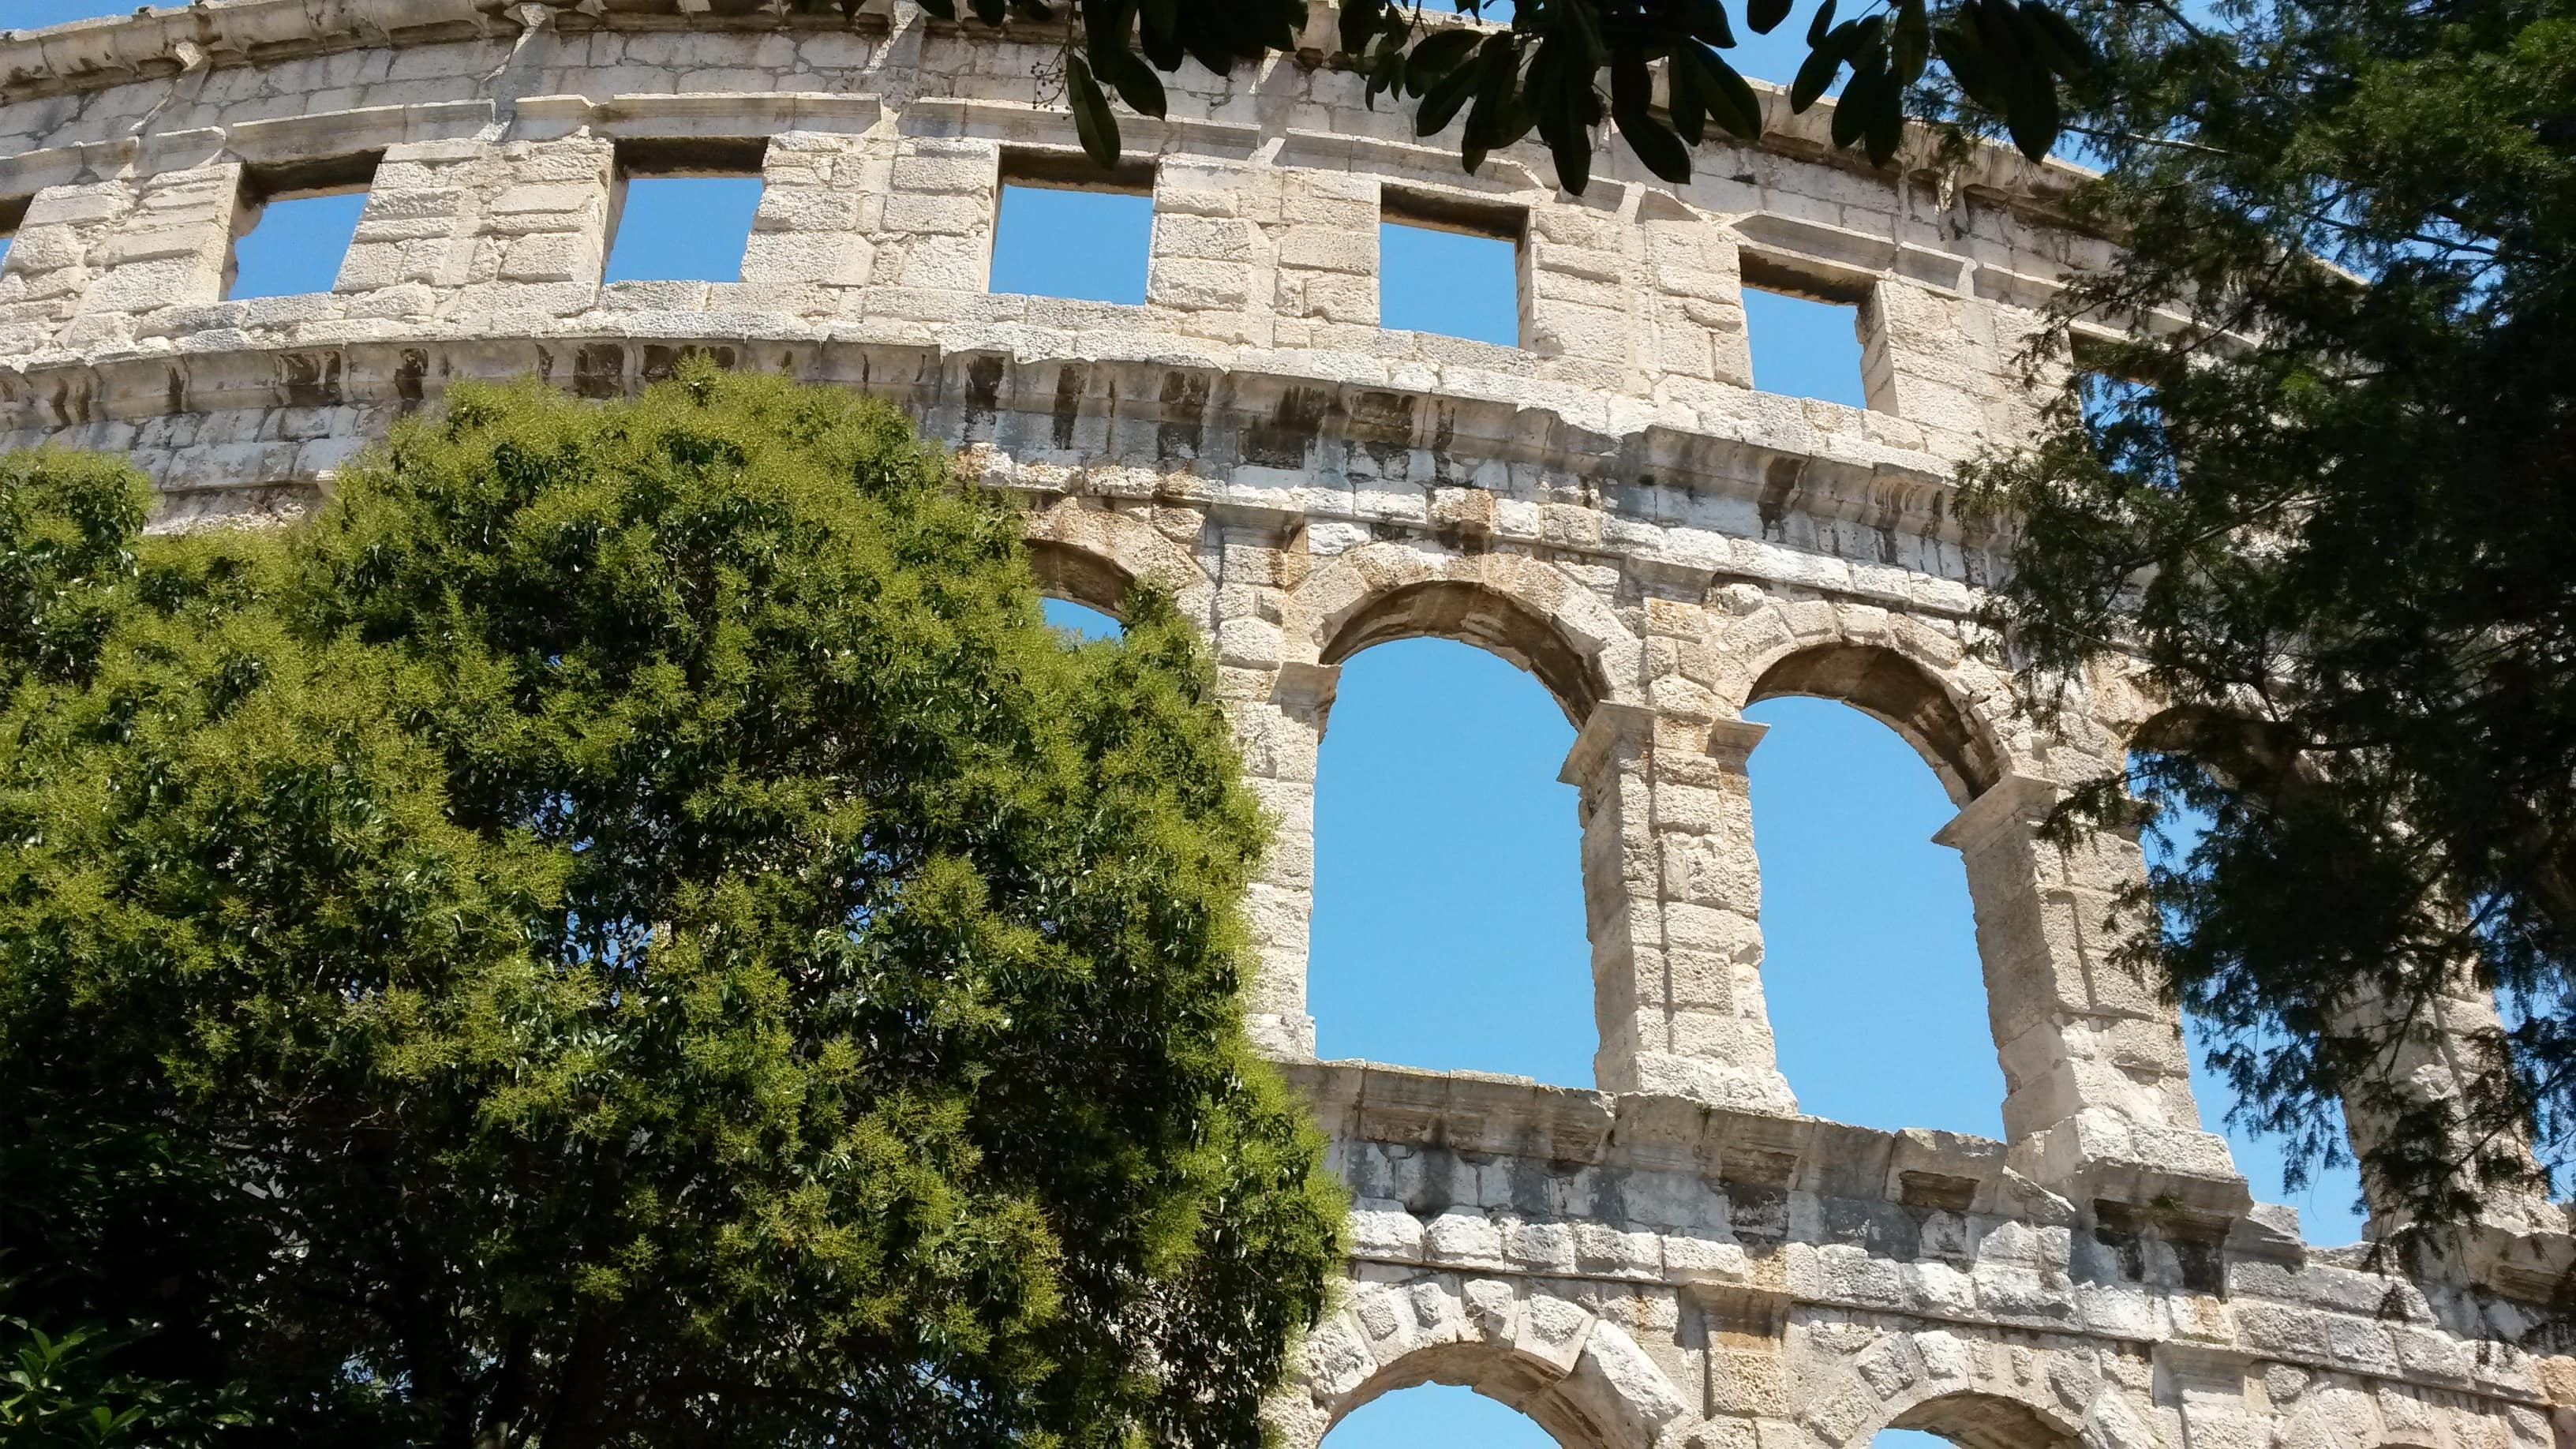 The 1st-century Roman amphitheatre is a top visitor attraction in Pula